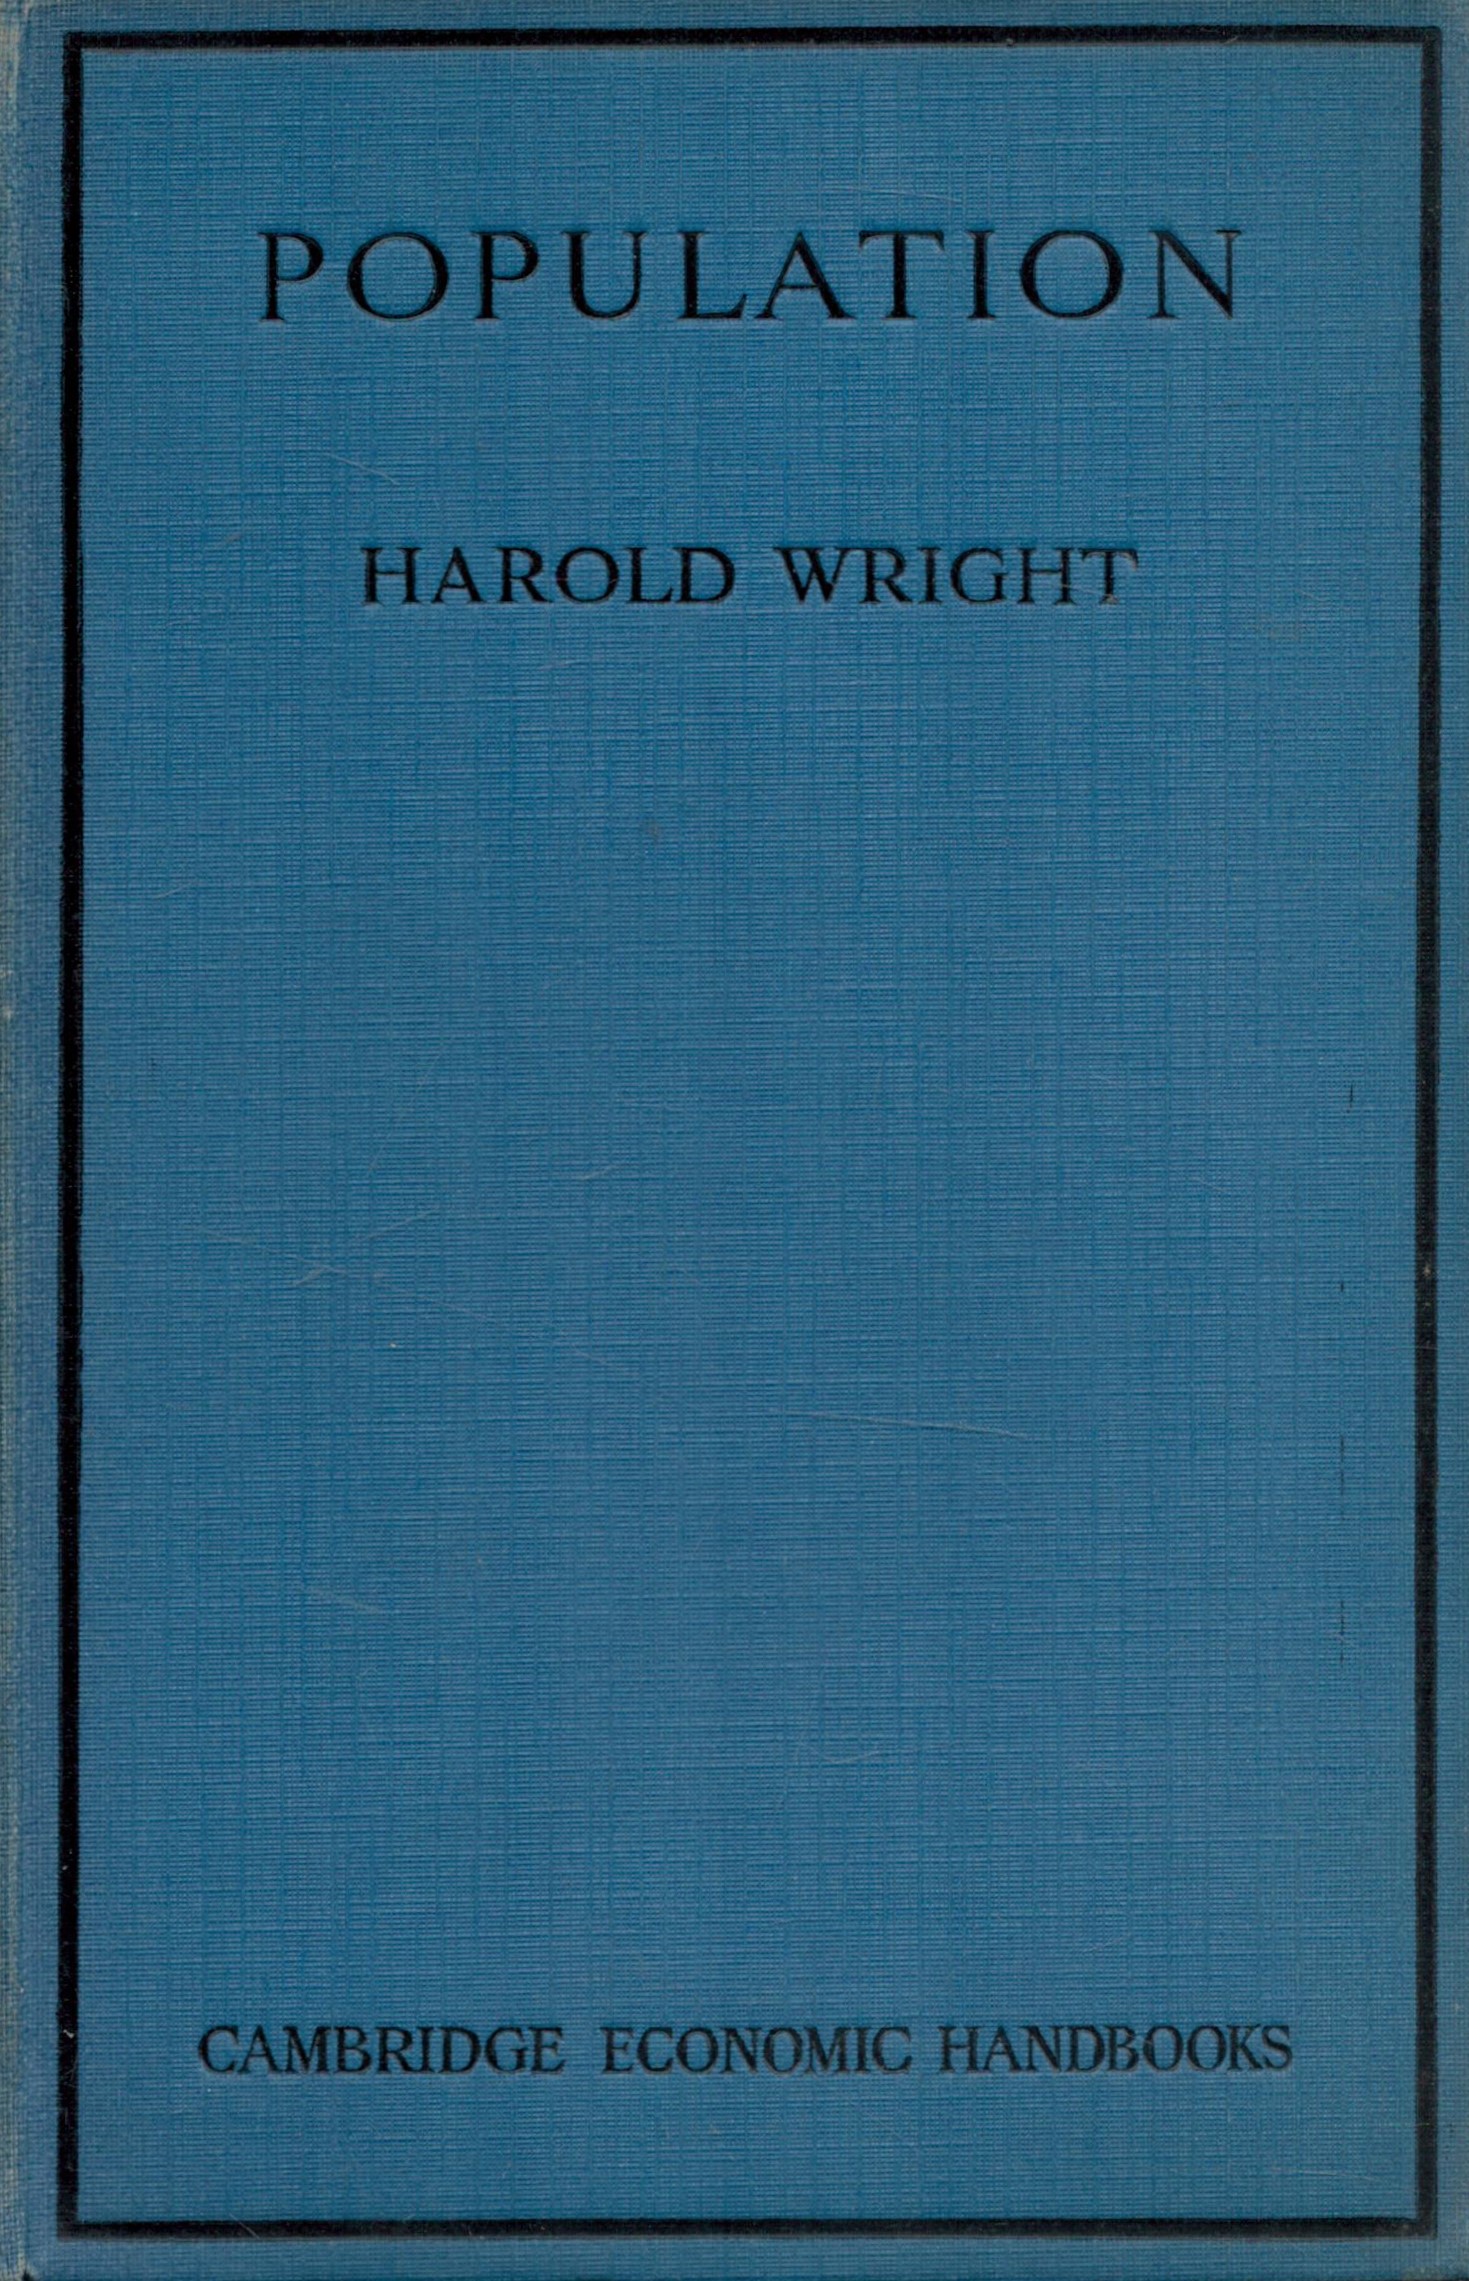 Harold Wright Population. Preface by J. M. Keynes. Published by Nisbet and Co. Ltd. London. 1923.